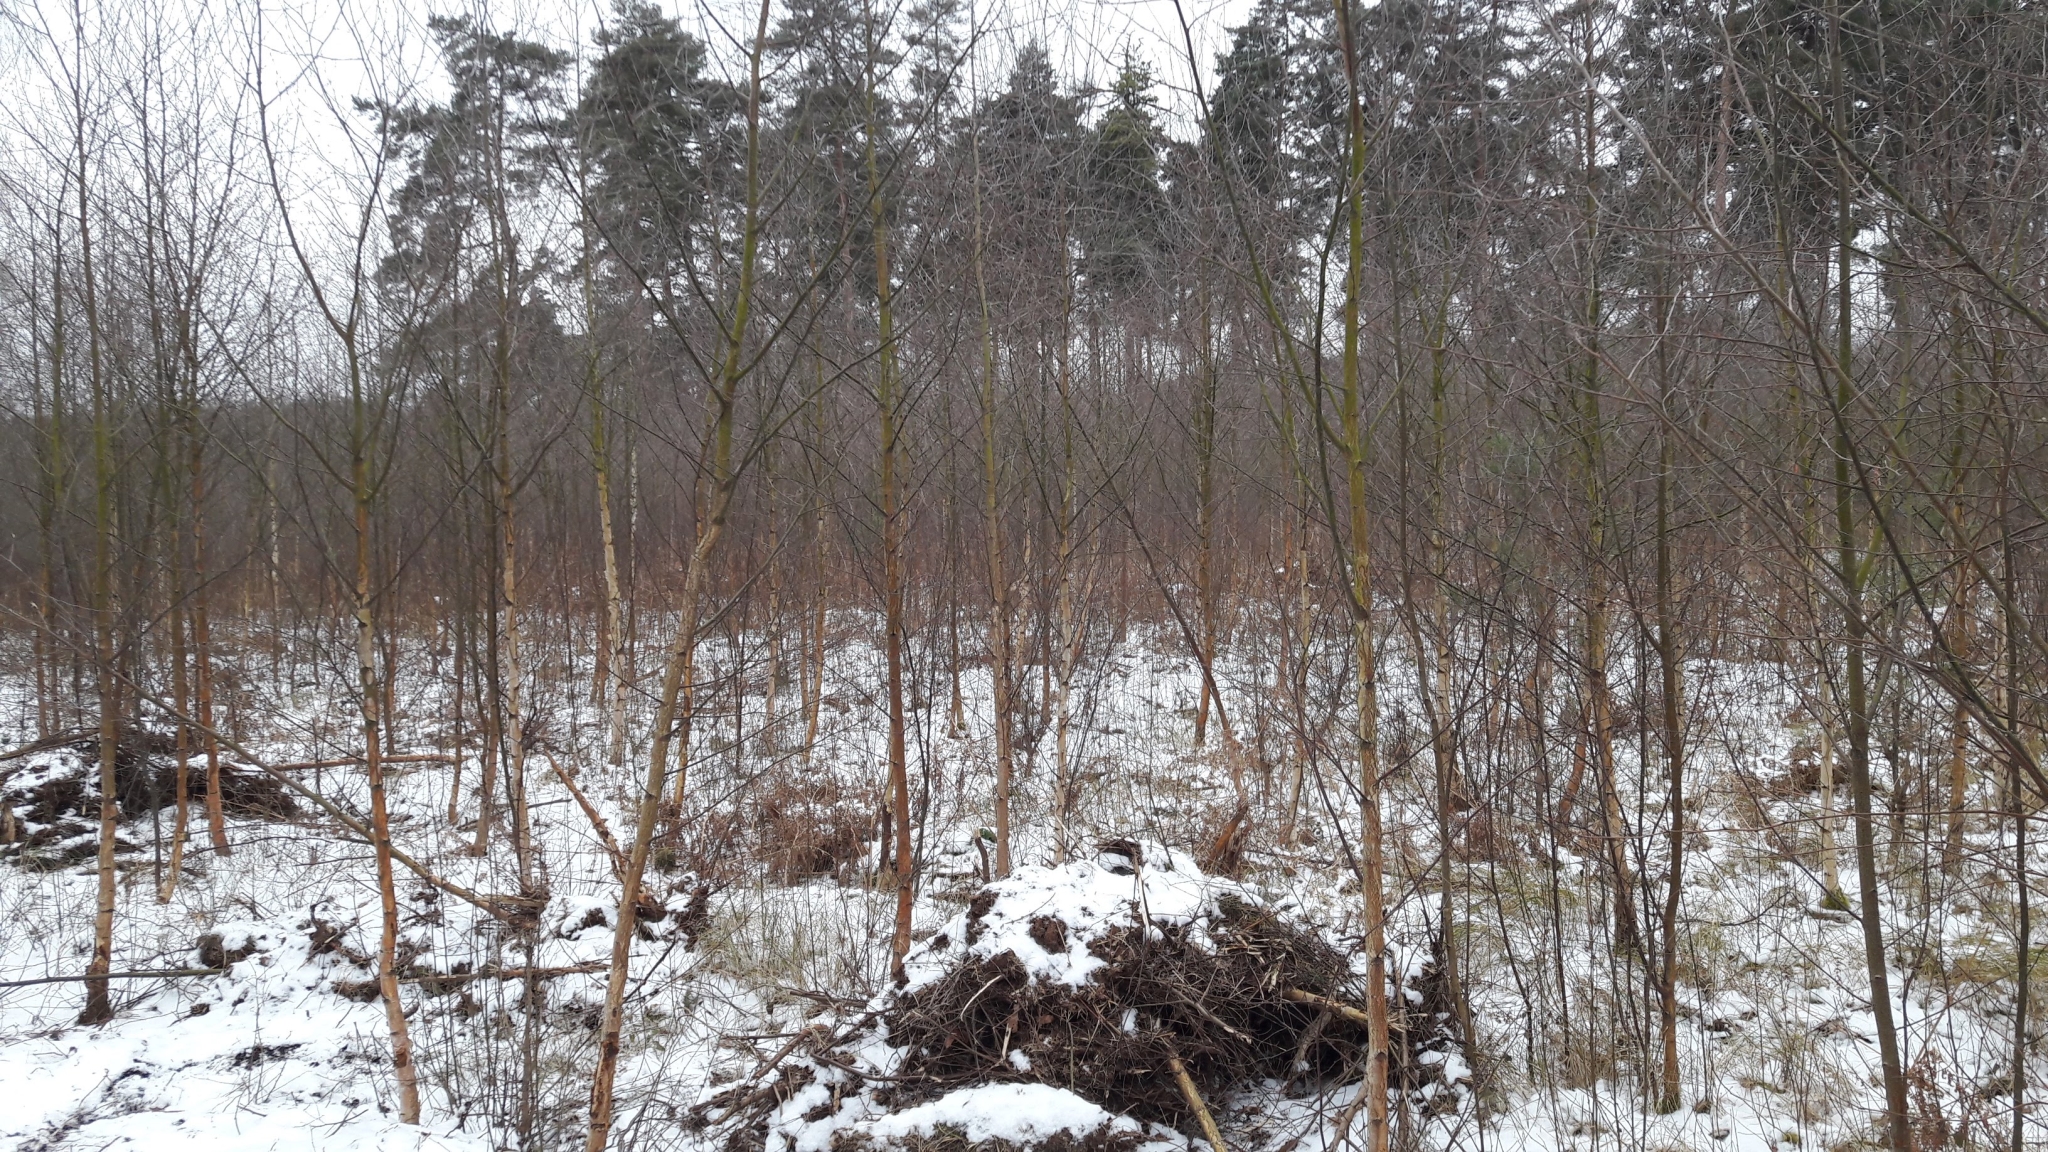 A photo from the FoTF Conservation Event - March 2018 - Birch Coppicing at High Lodge : A shot out from the work site